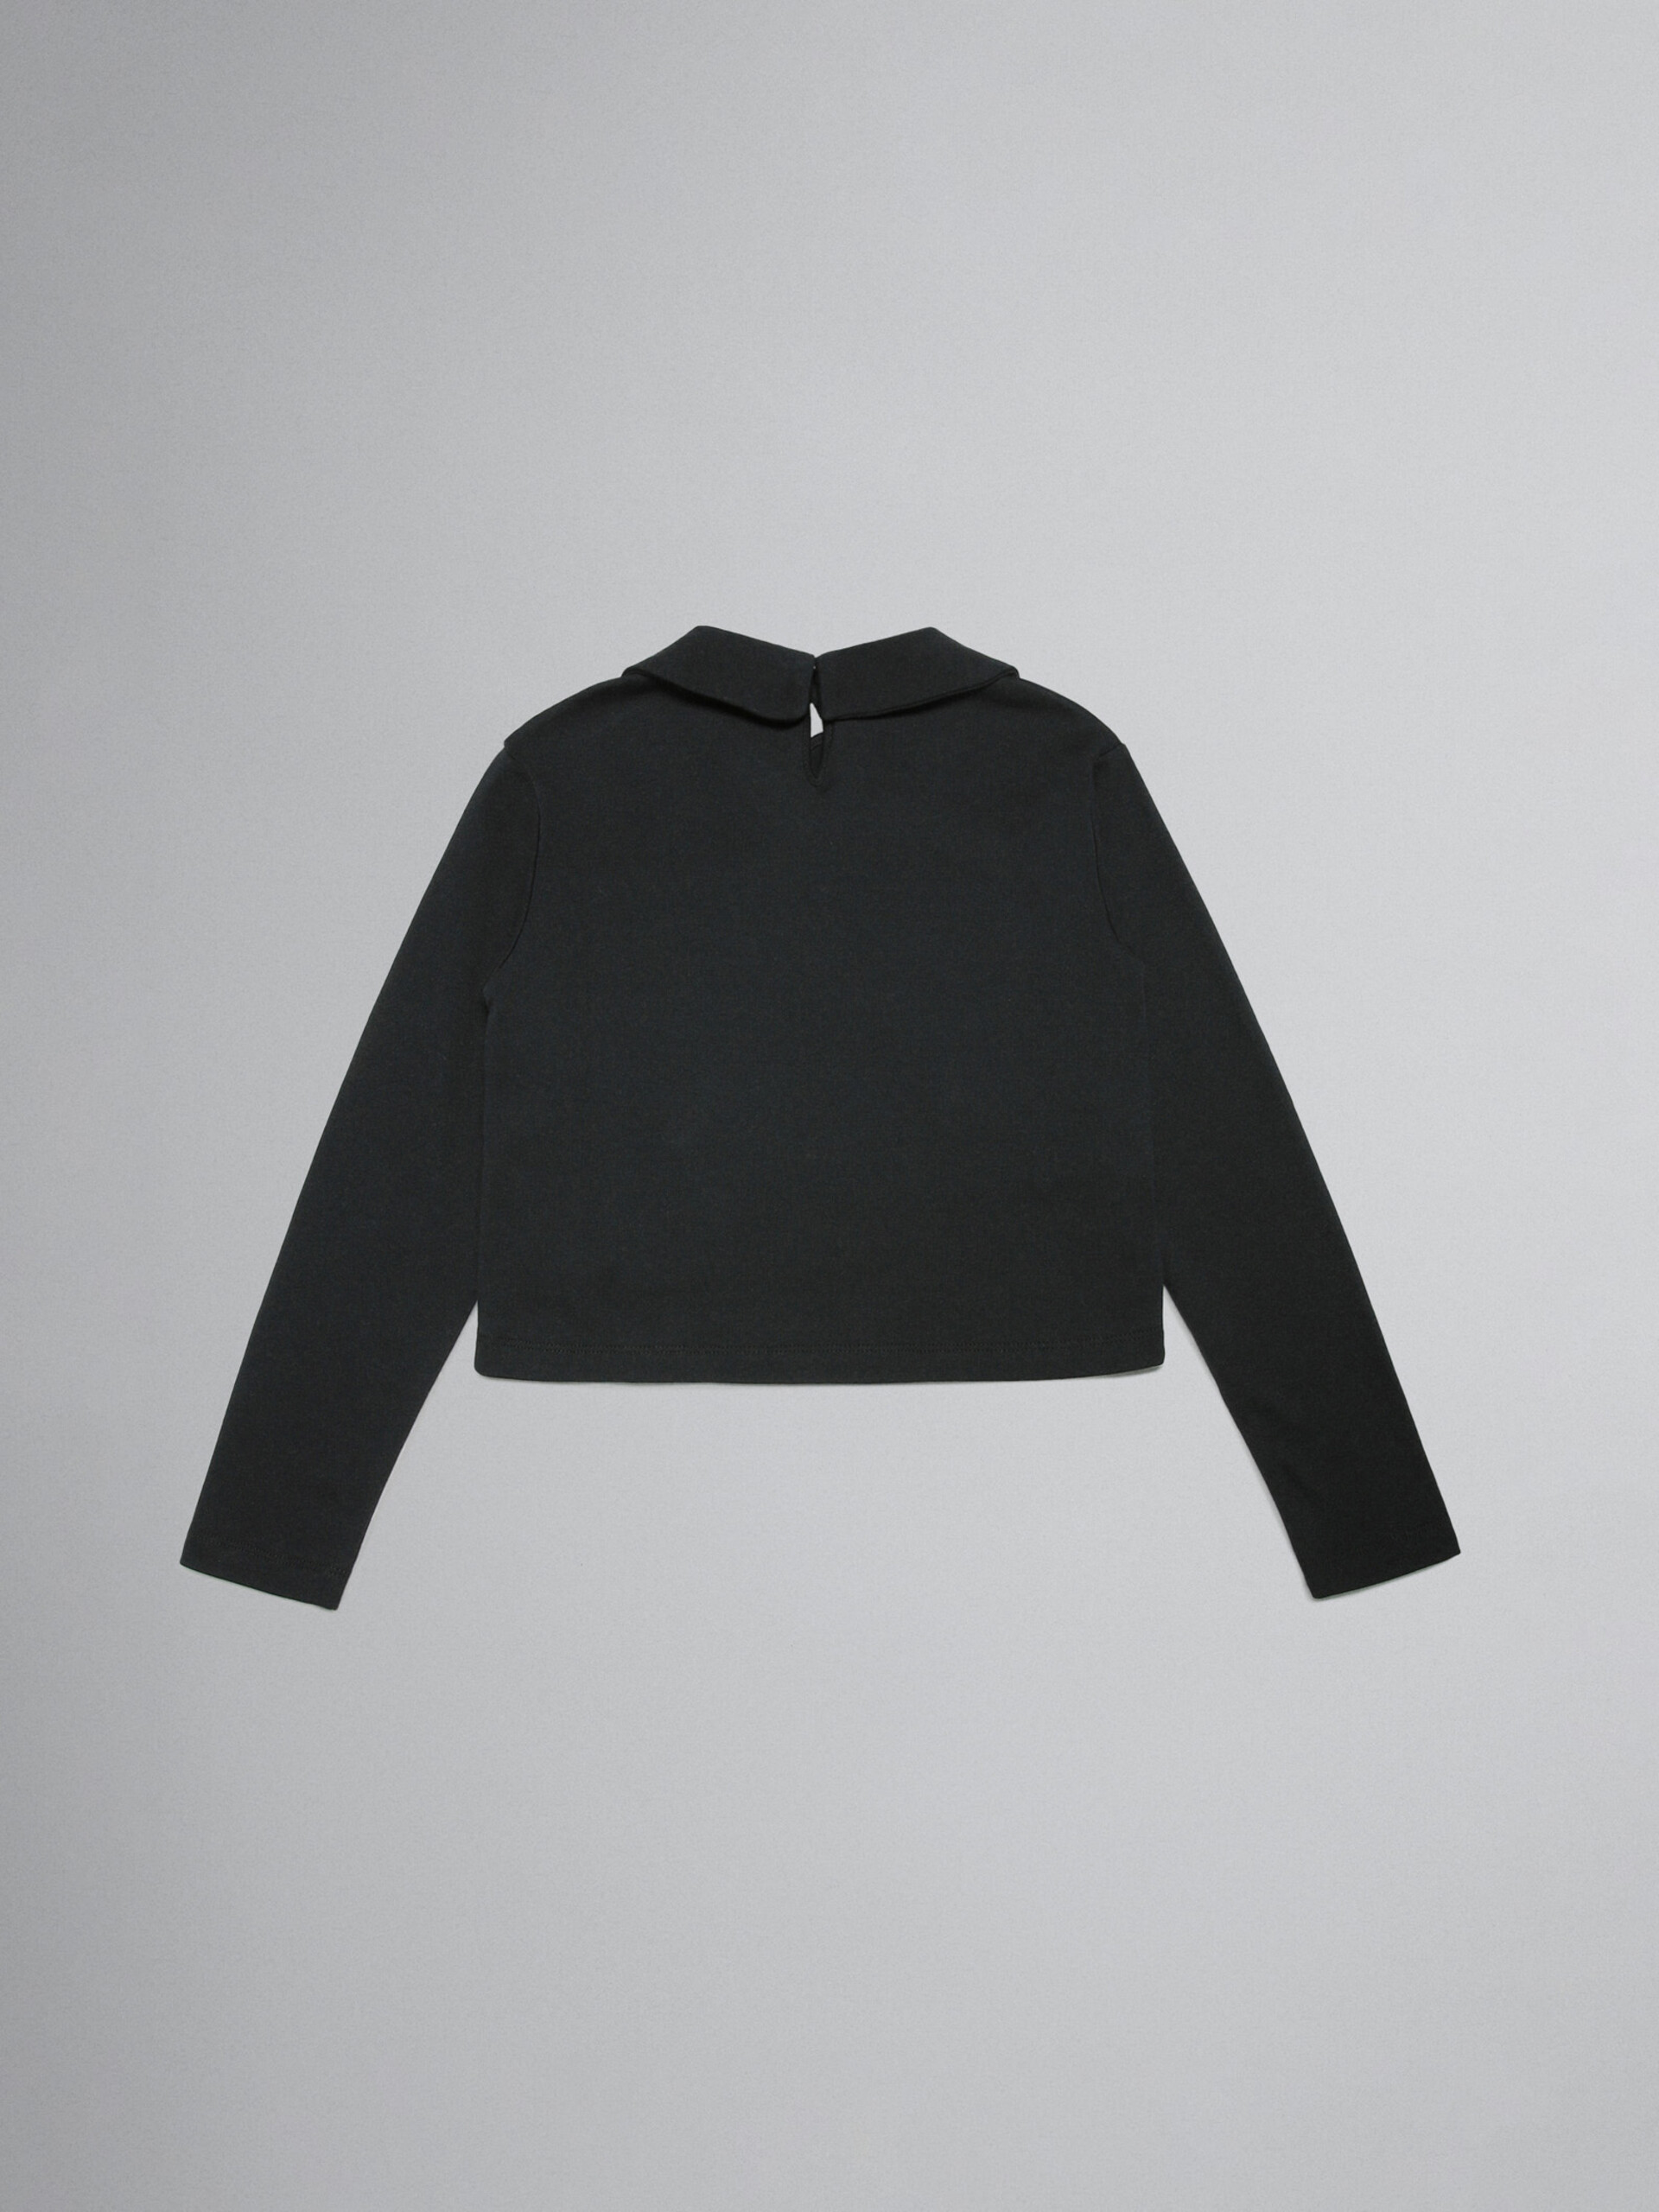 Black ruffle top with "Marni" embroidery - Sweaters - Image 2